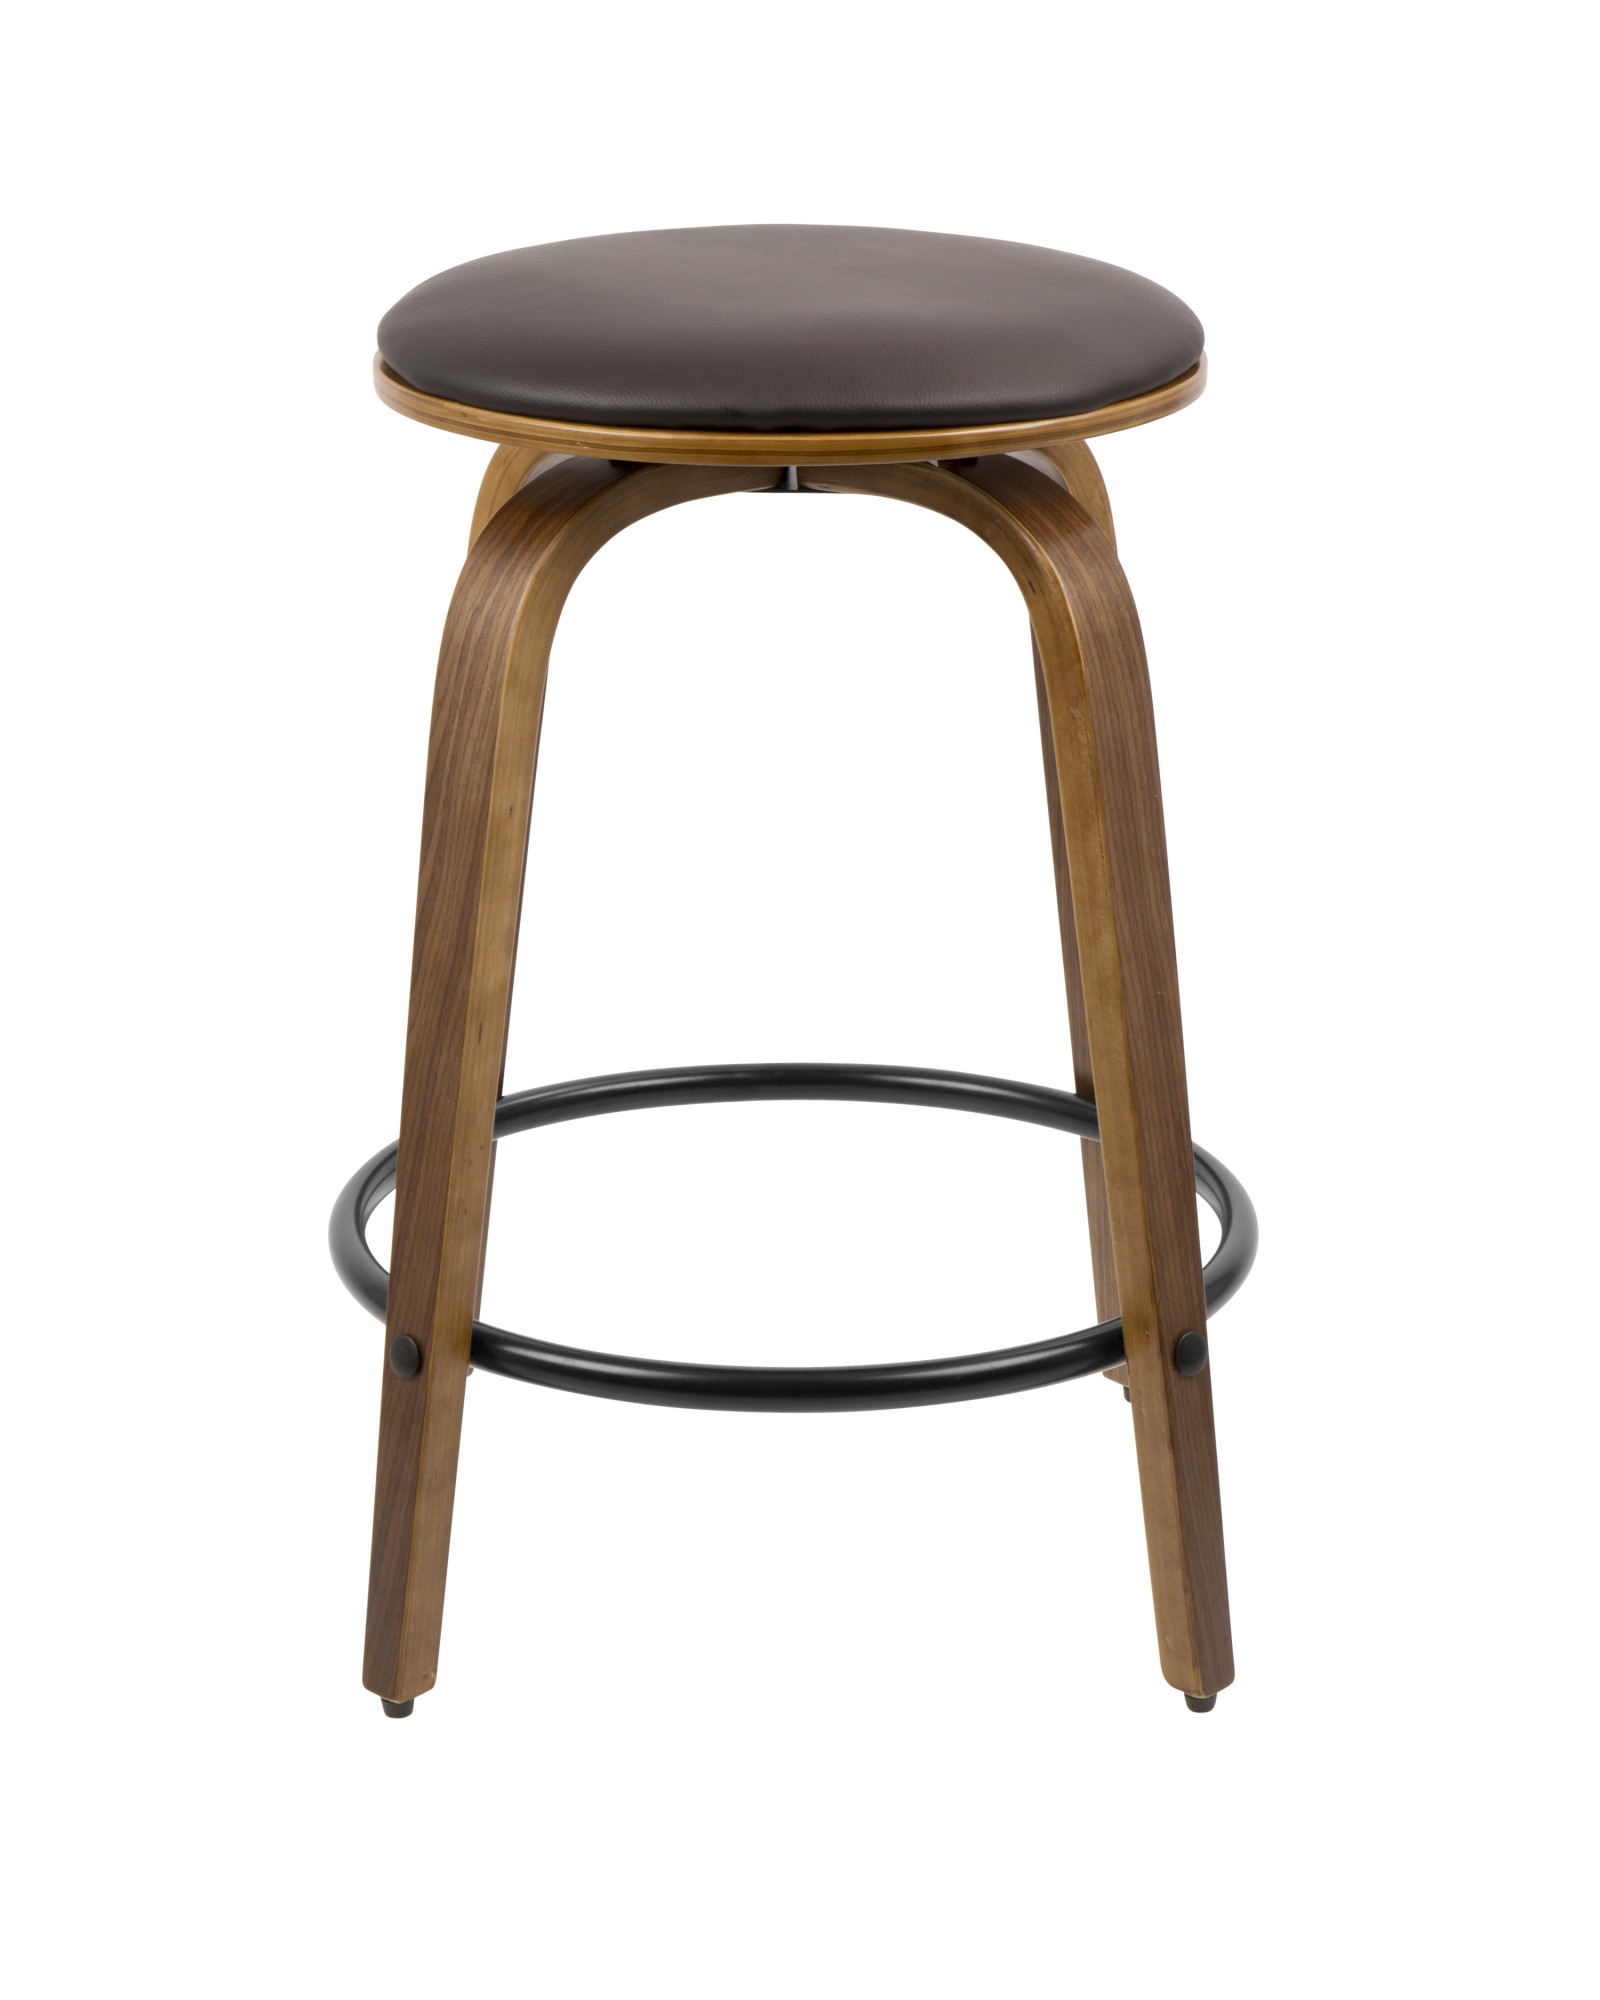 Porto Mid-Century Modern Counter Stool in Walnut and Brown Faux Leather with Black Footrest - Set of 2